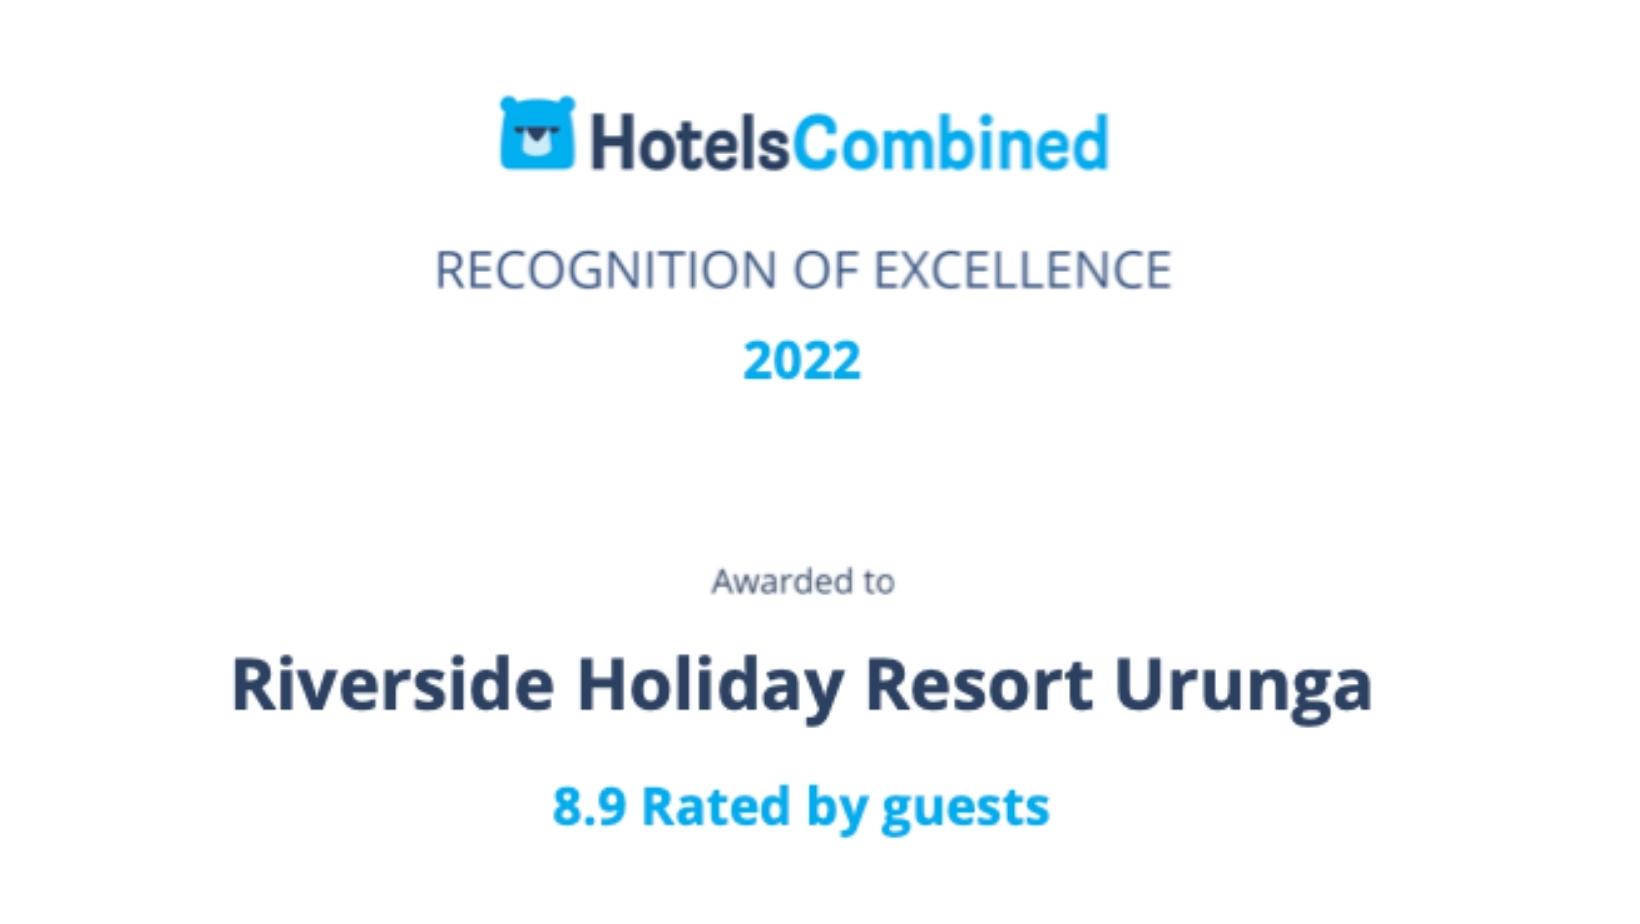 Riverside Holiday Resort Urunga joins an elite group of hotels around the world that have been awarded the HotelsCombined Recognition of Excellence.